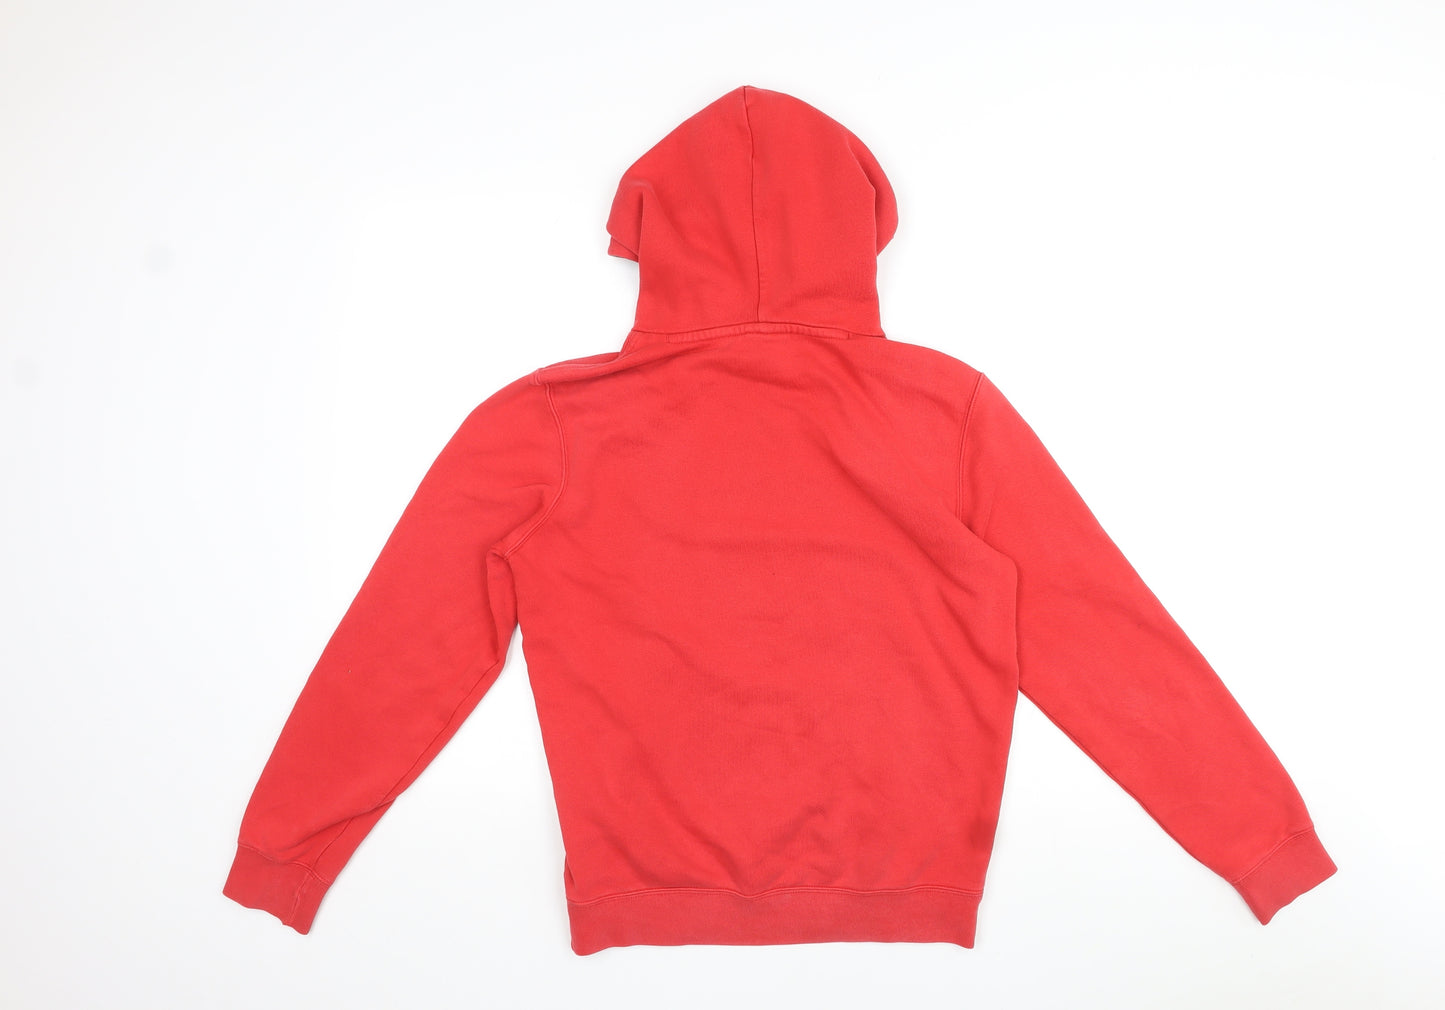 Champion Mens Red Cotton Pullover Hoodie Size S - Logo